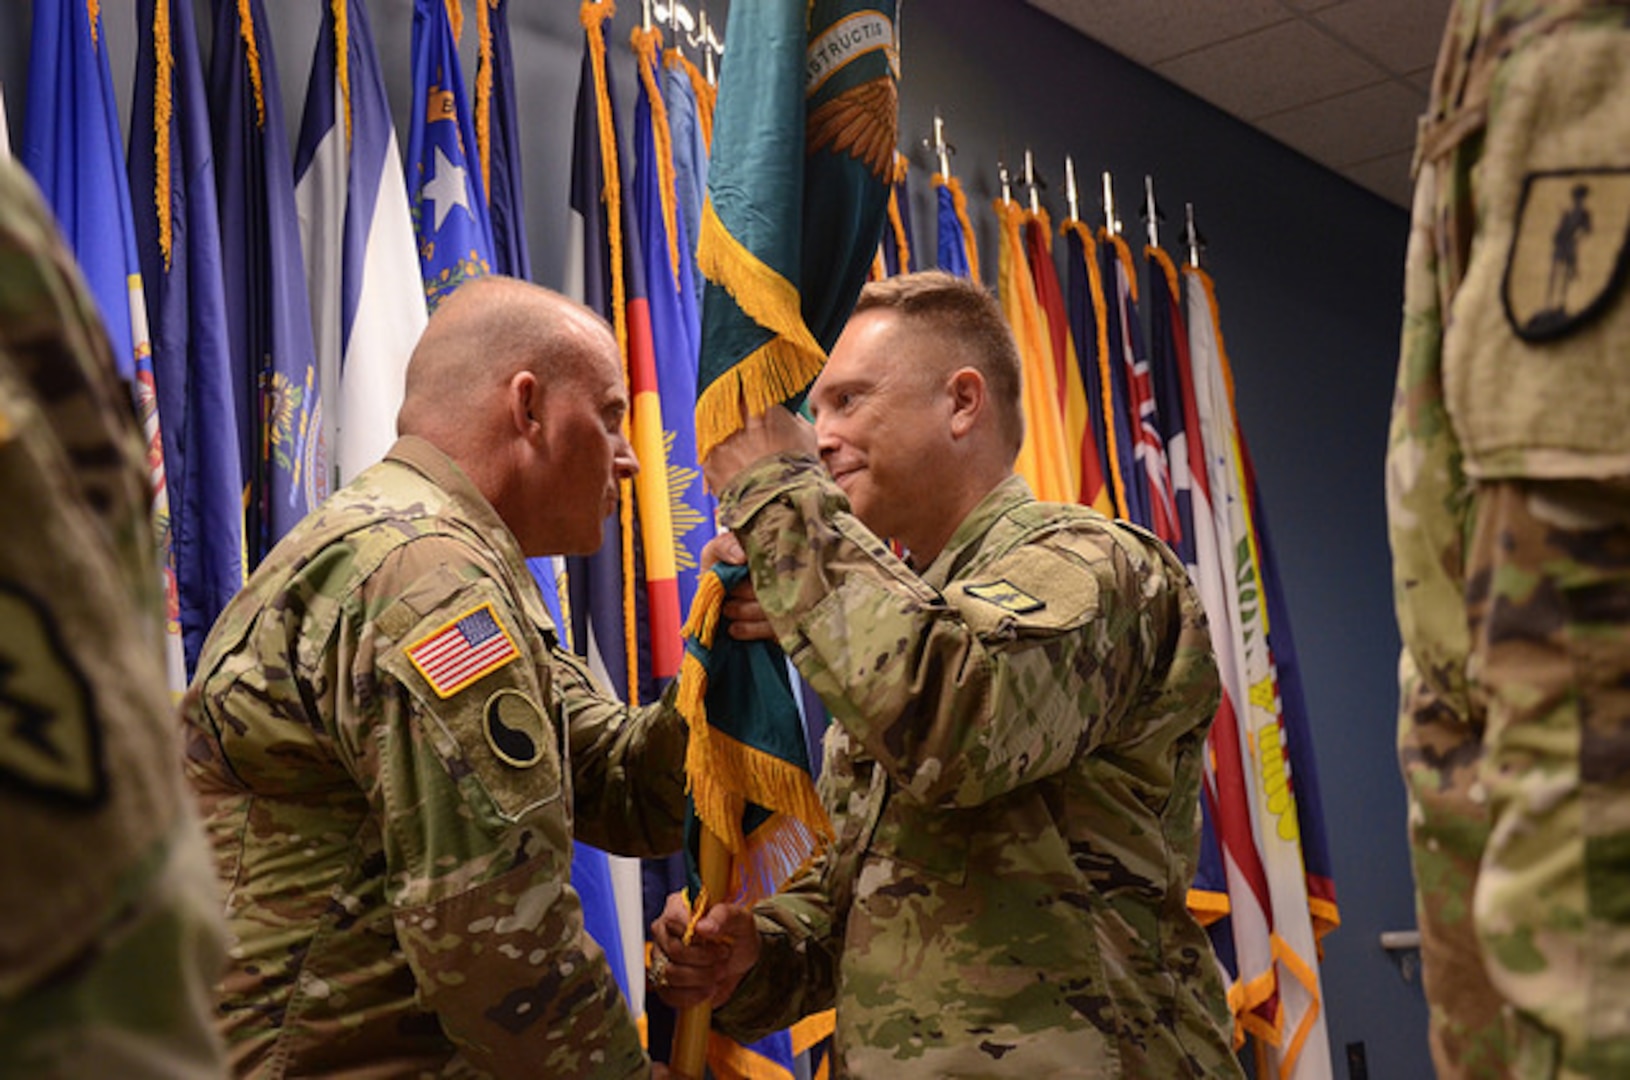 Hubbard takes command of 183rd RTI